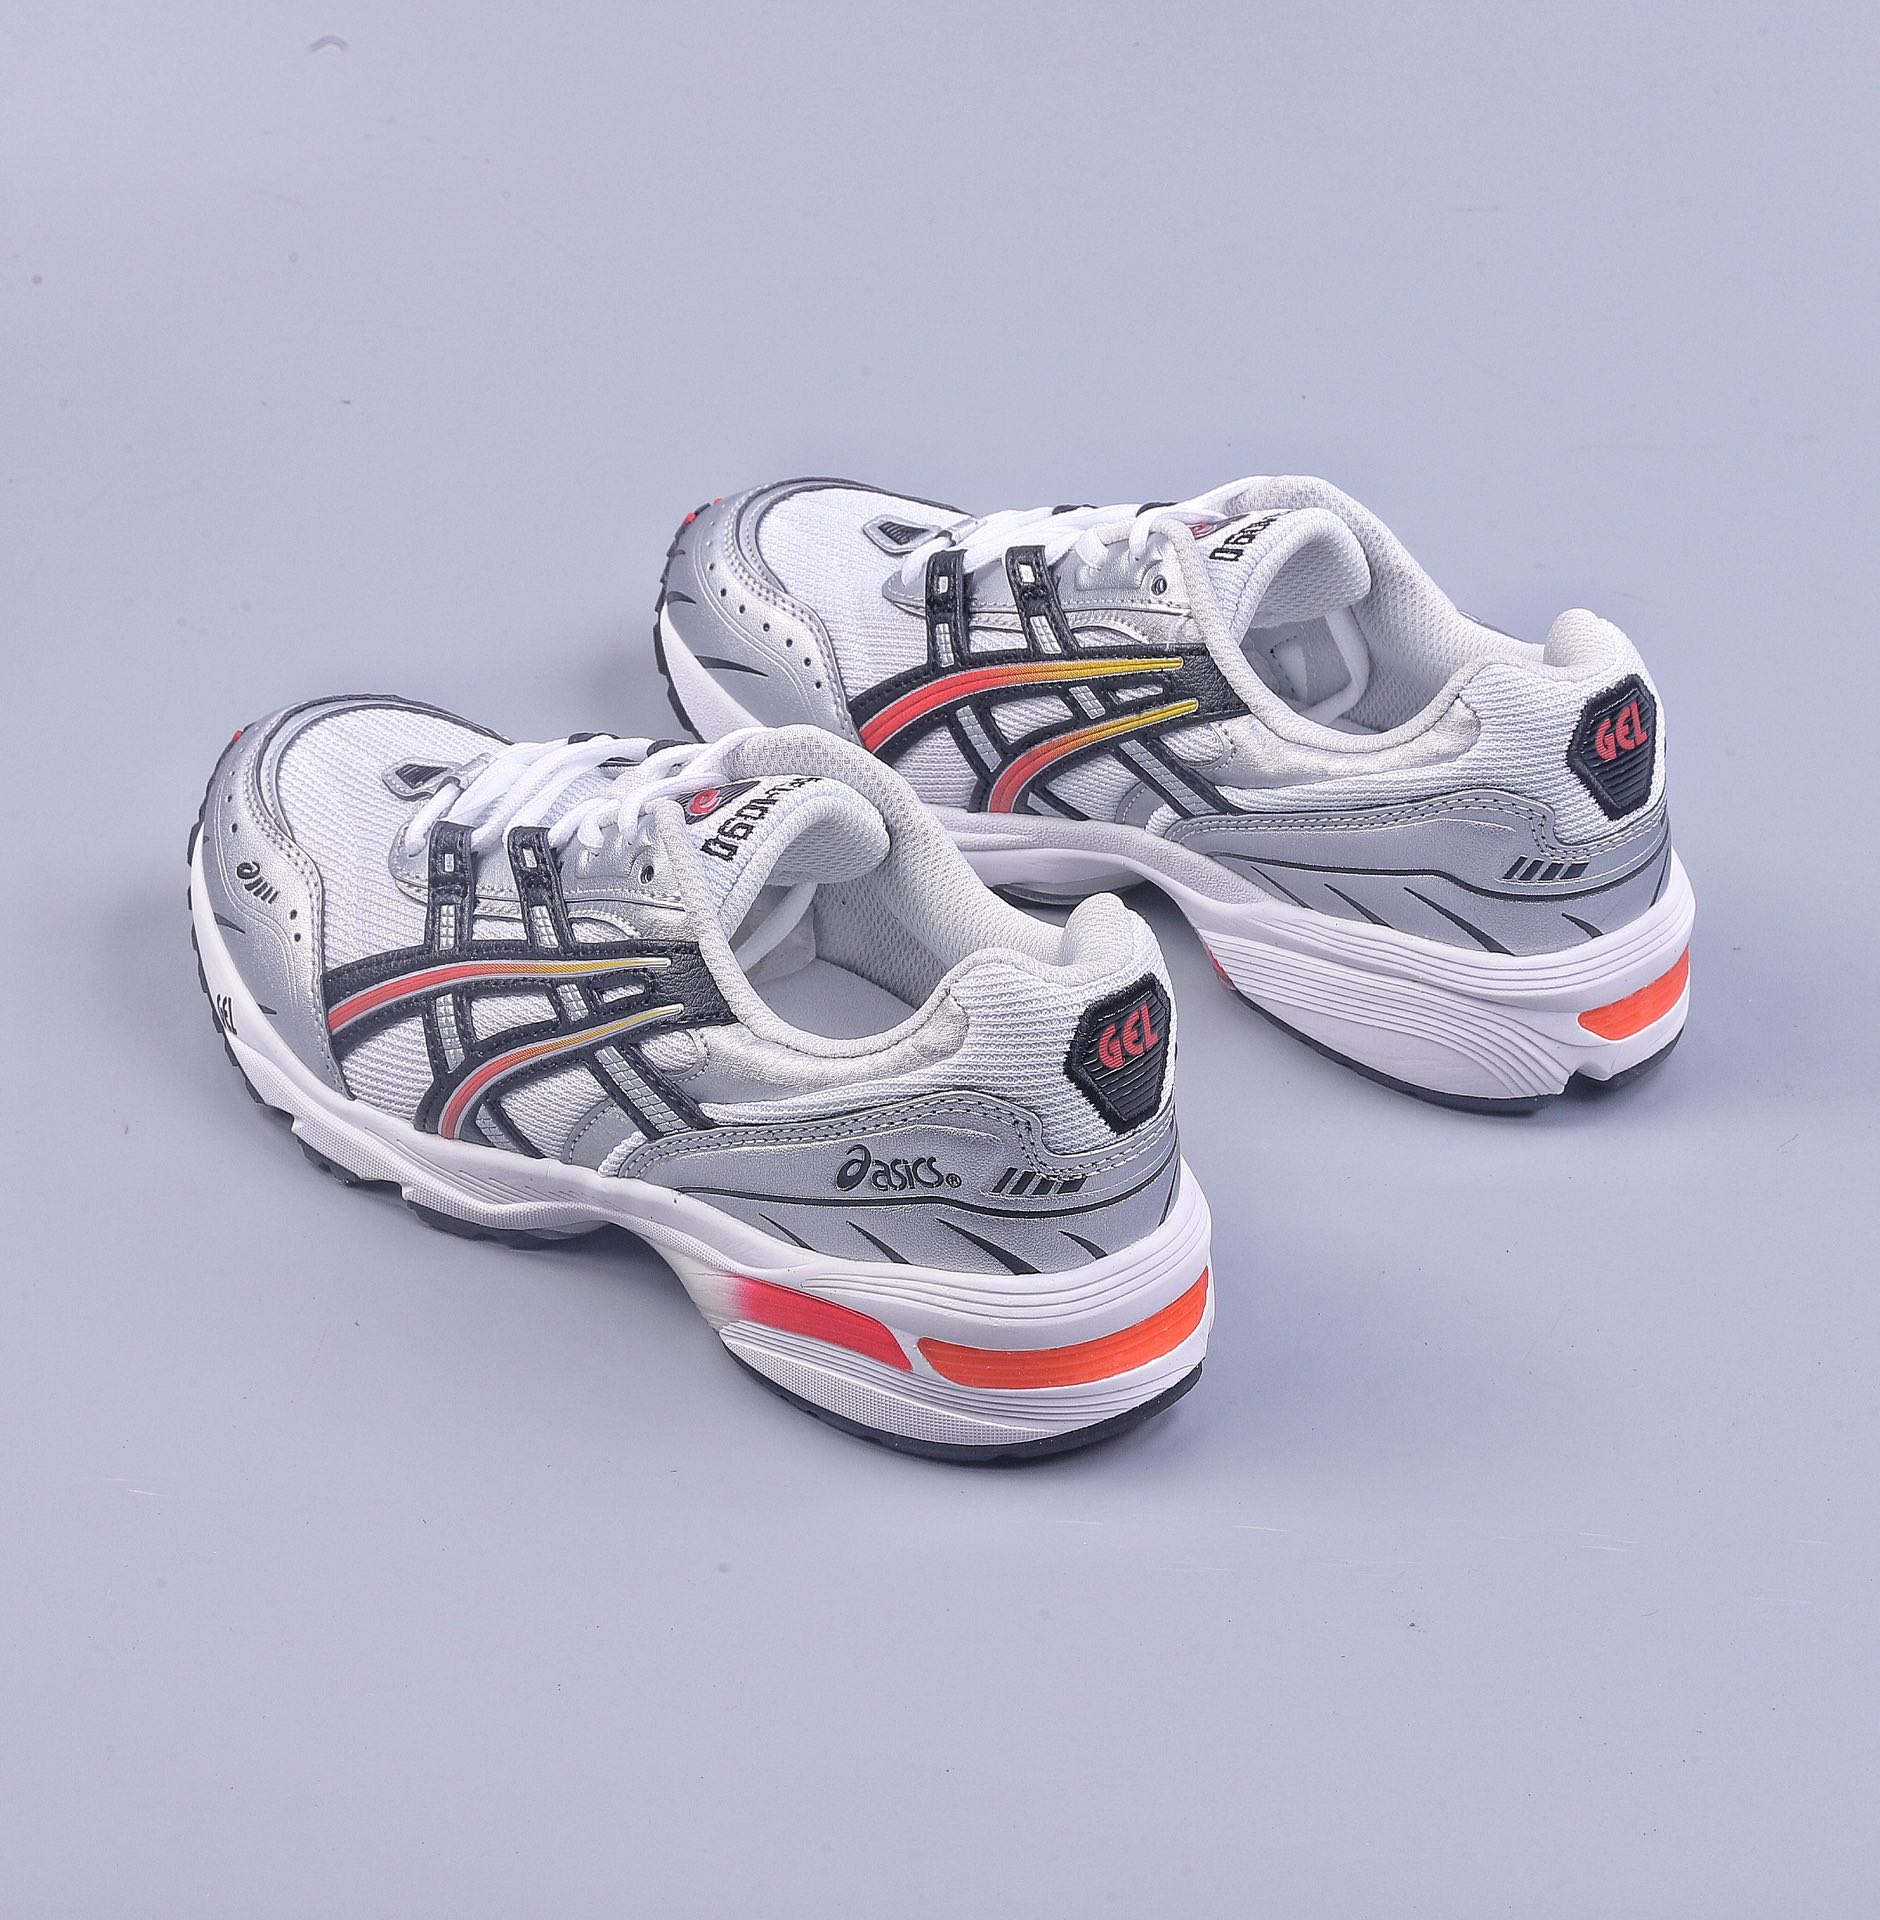 Asics Tiger GEL-1090 outdoor style low-top casual sports running shoes 1021A285-100